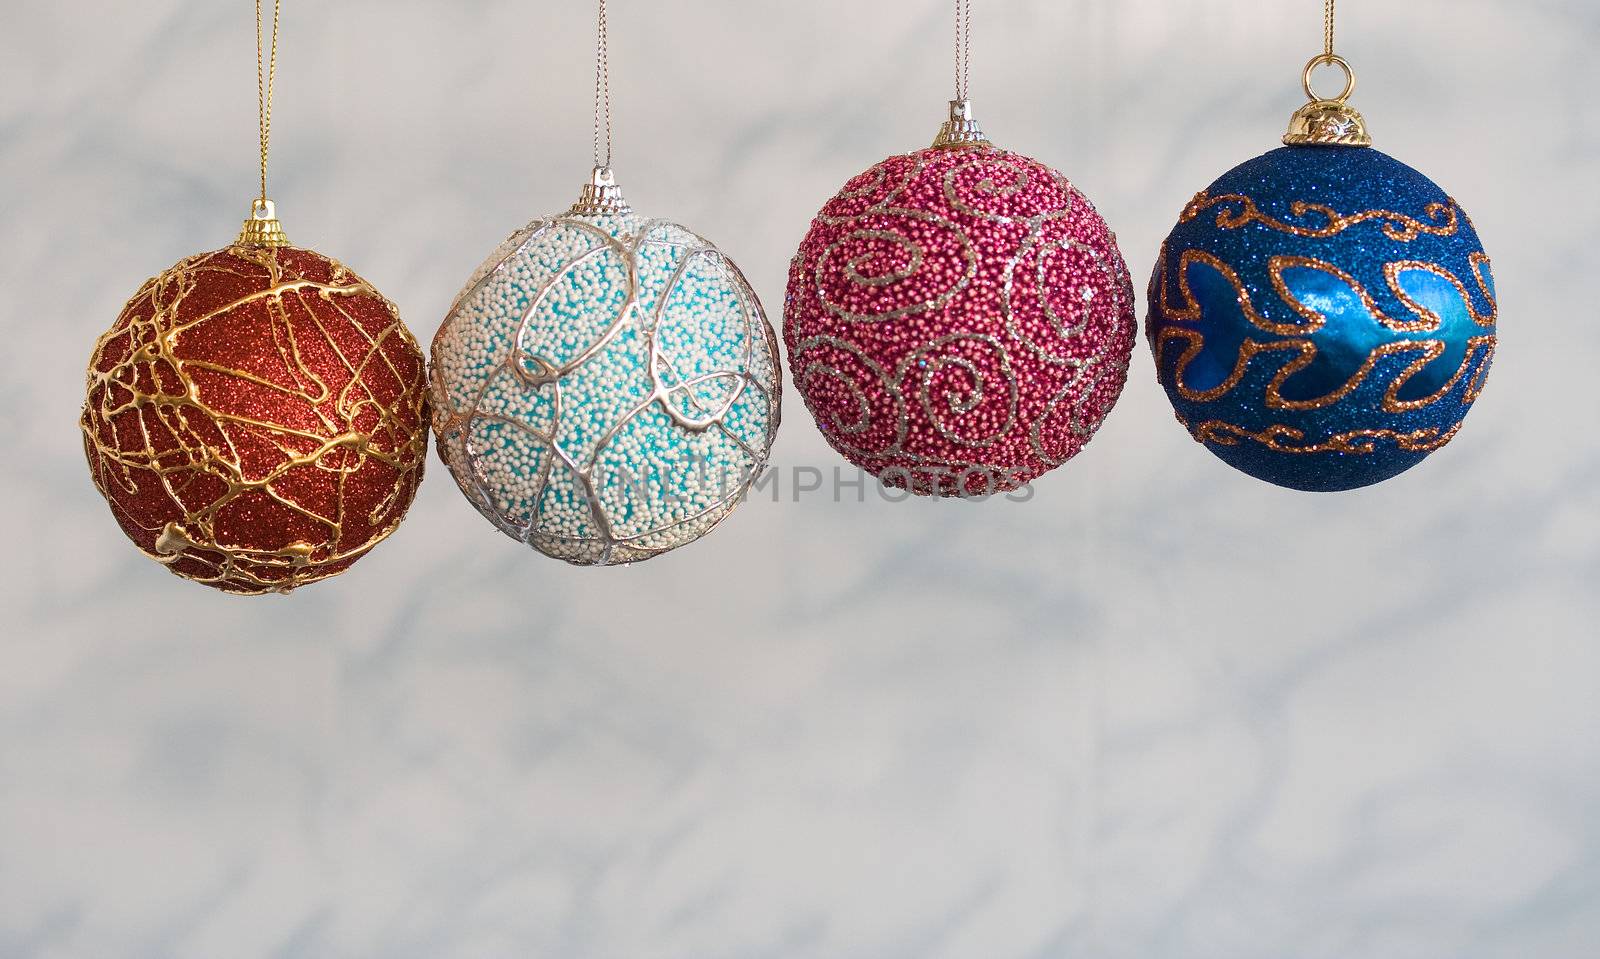 Four handicraft christmas balls of different colors